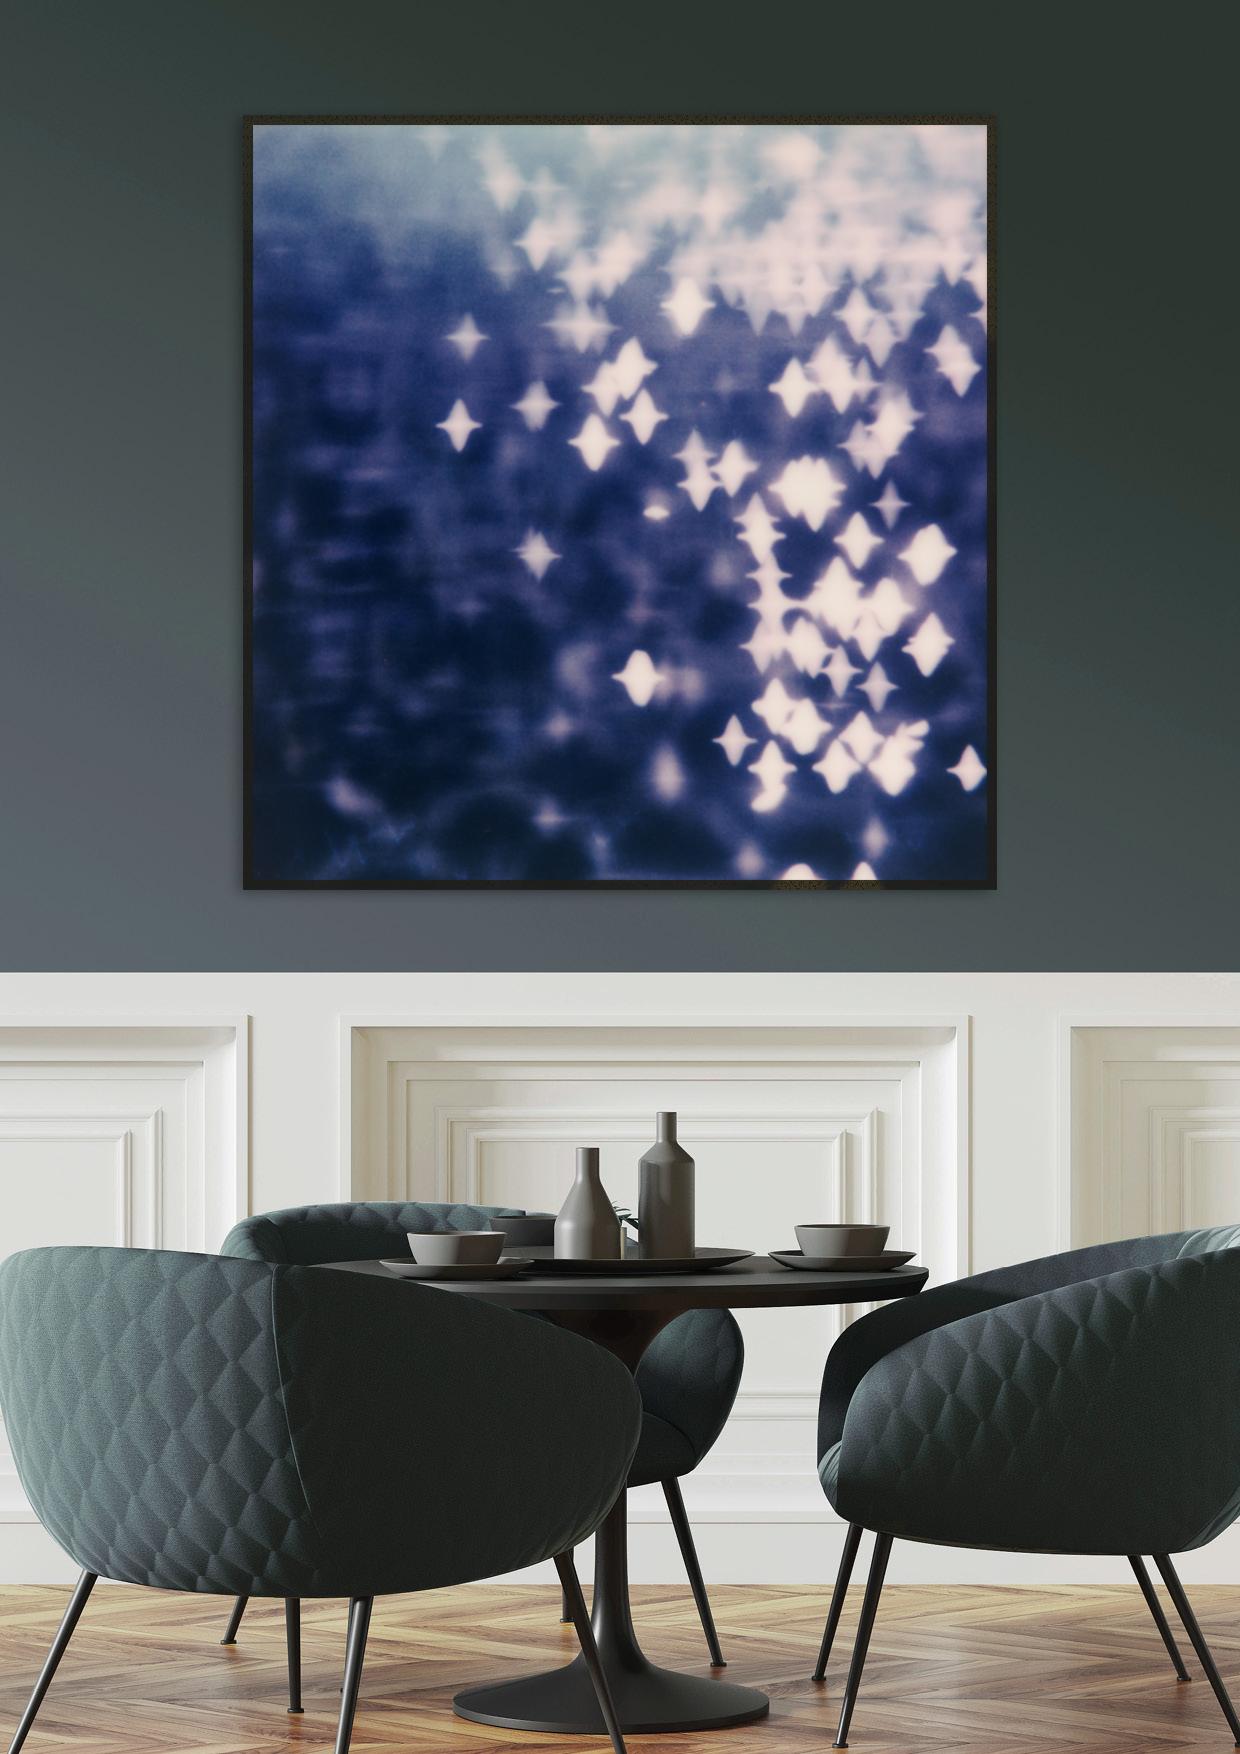 Blue Moon - Still Life Photographic Print Framed

120x120cm

Austrian Contemporary Photographer Pia Clodi, demonstrates immense skill through her analog photography, which is often poetic, abstract and fleeting. To shine like she once did, is a